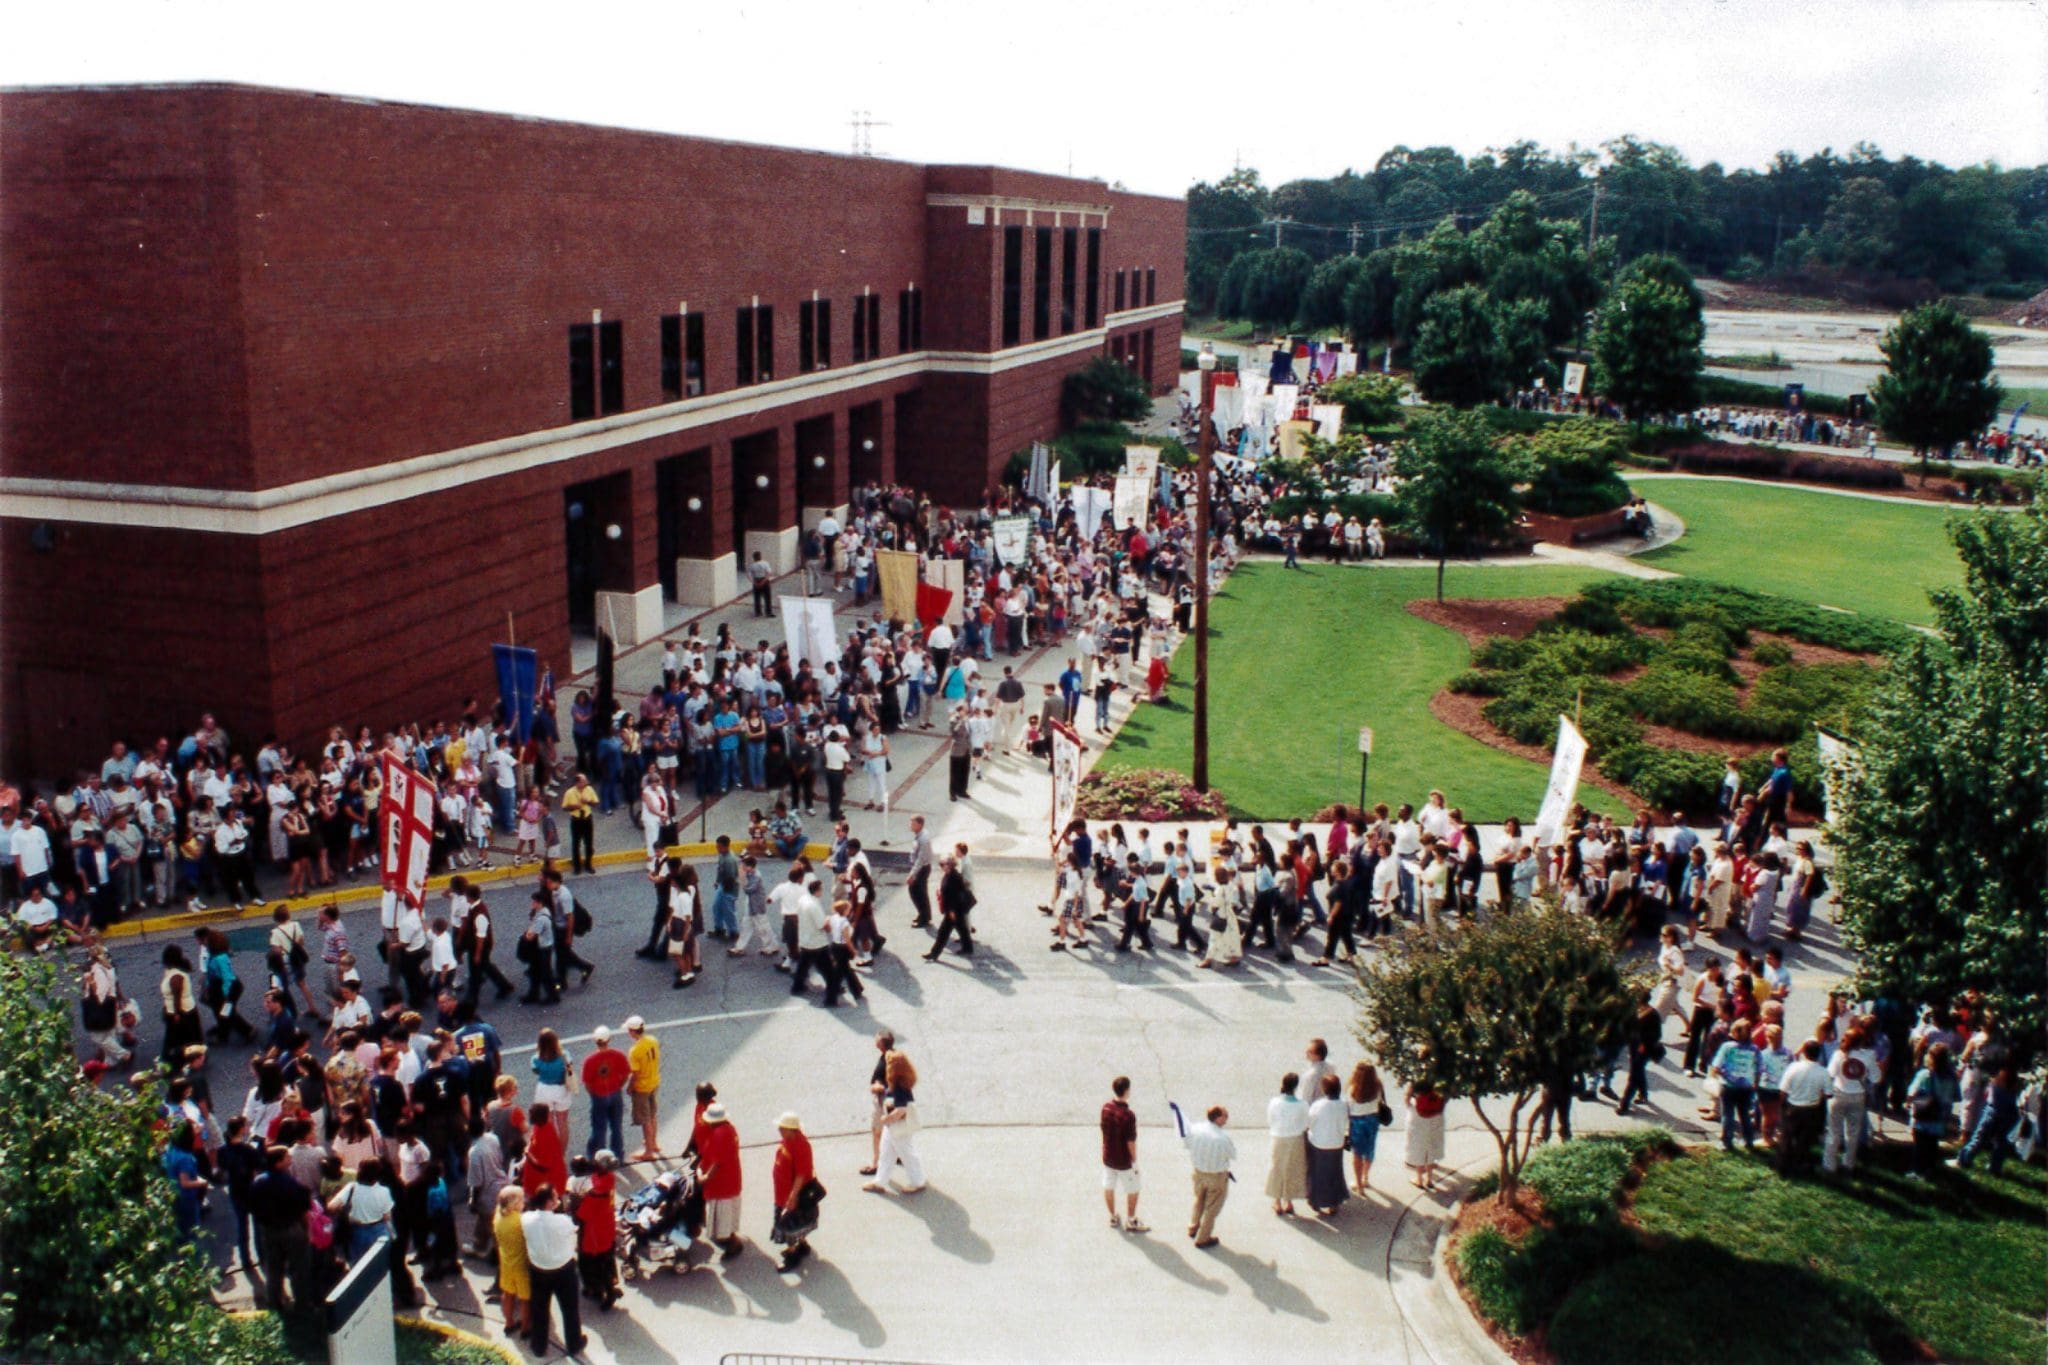 115 banners representing parishes, religious organizations, and Catholic schools assemble at the procession for the Eucharistic Renewal at the Georgia International Convention Center (GICC) [See Georgia Bulletin: June 21, 2001]